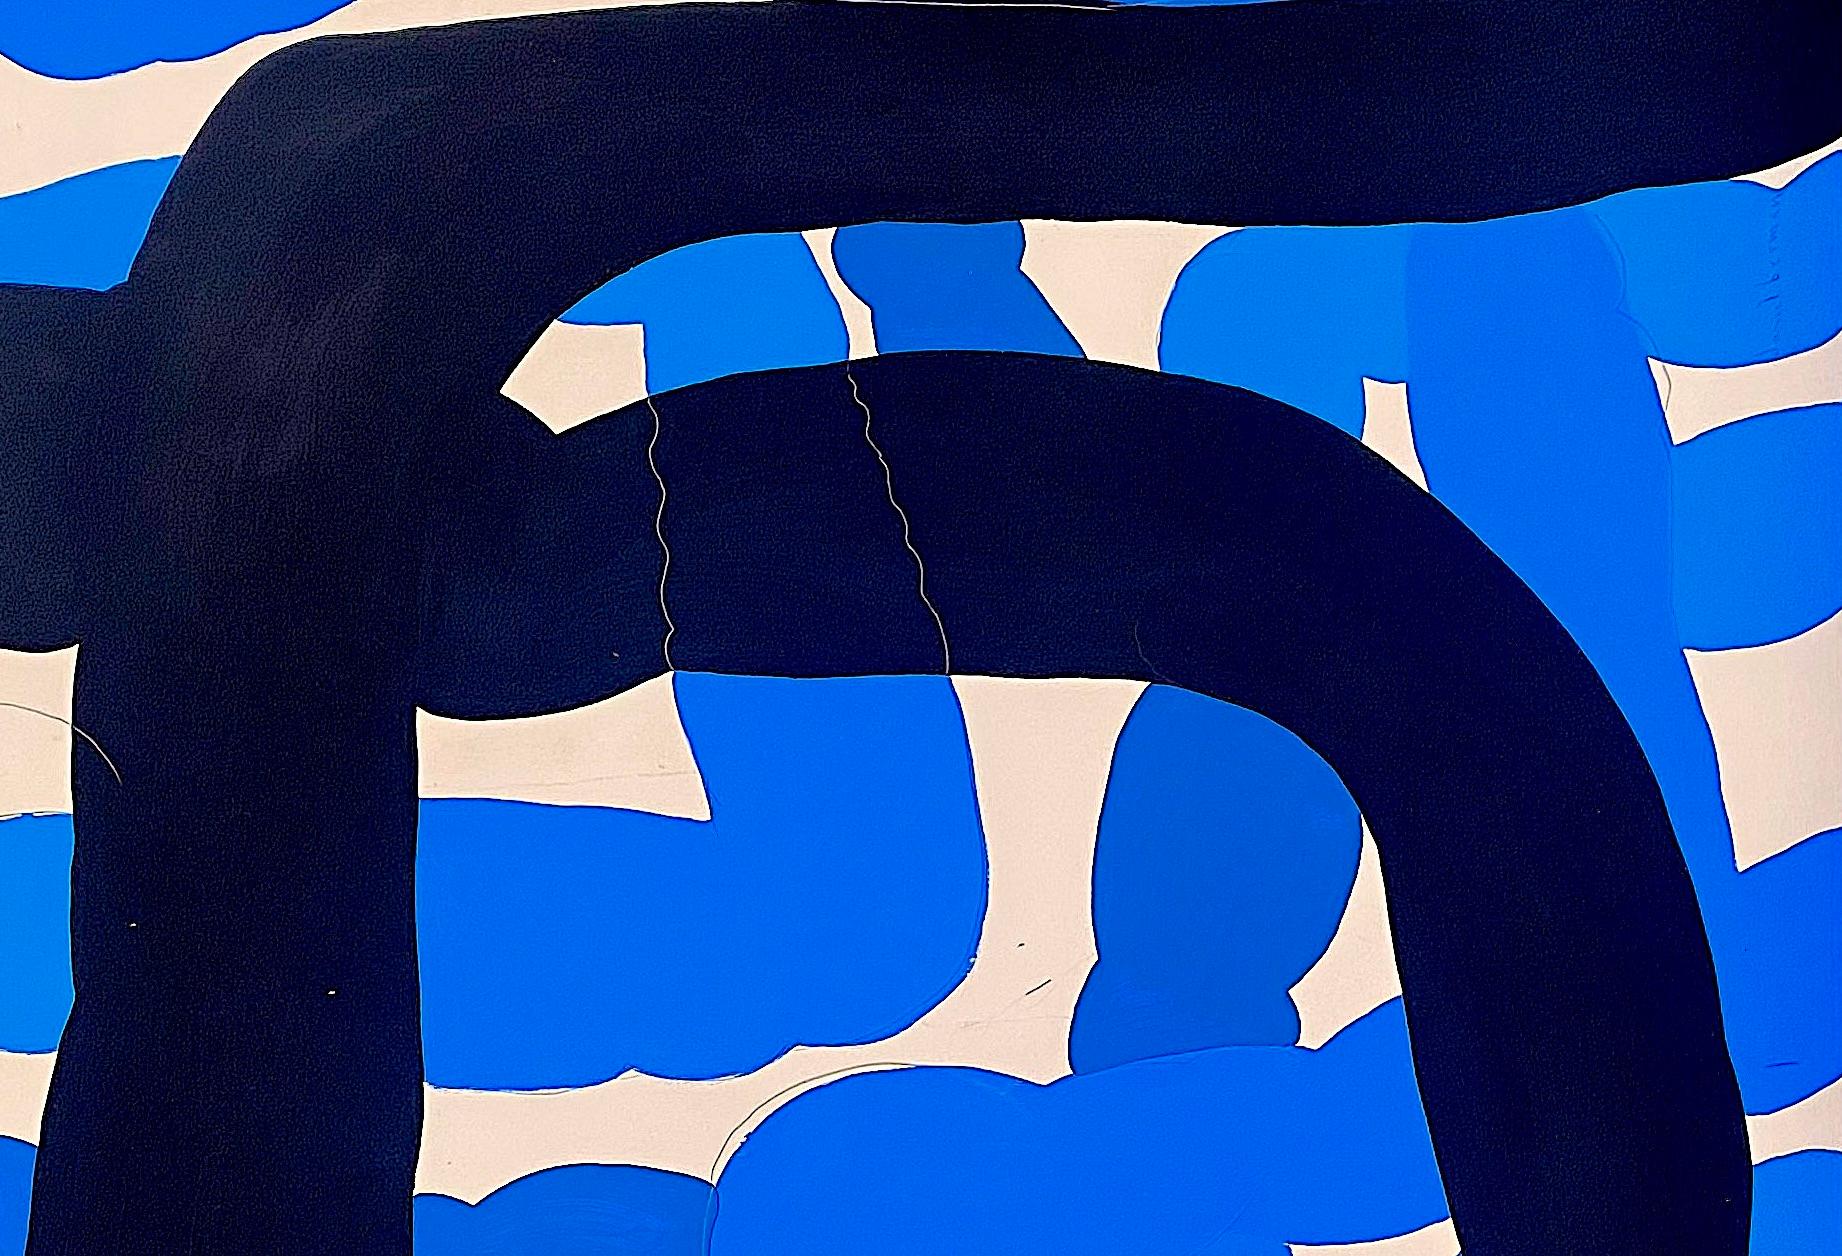 Black and blue knots on a white landscape - Painting by Daniel Berman